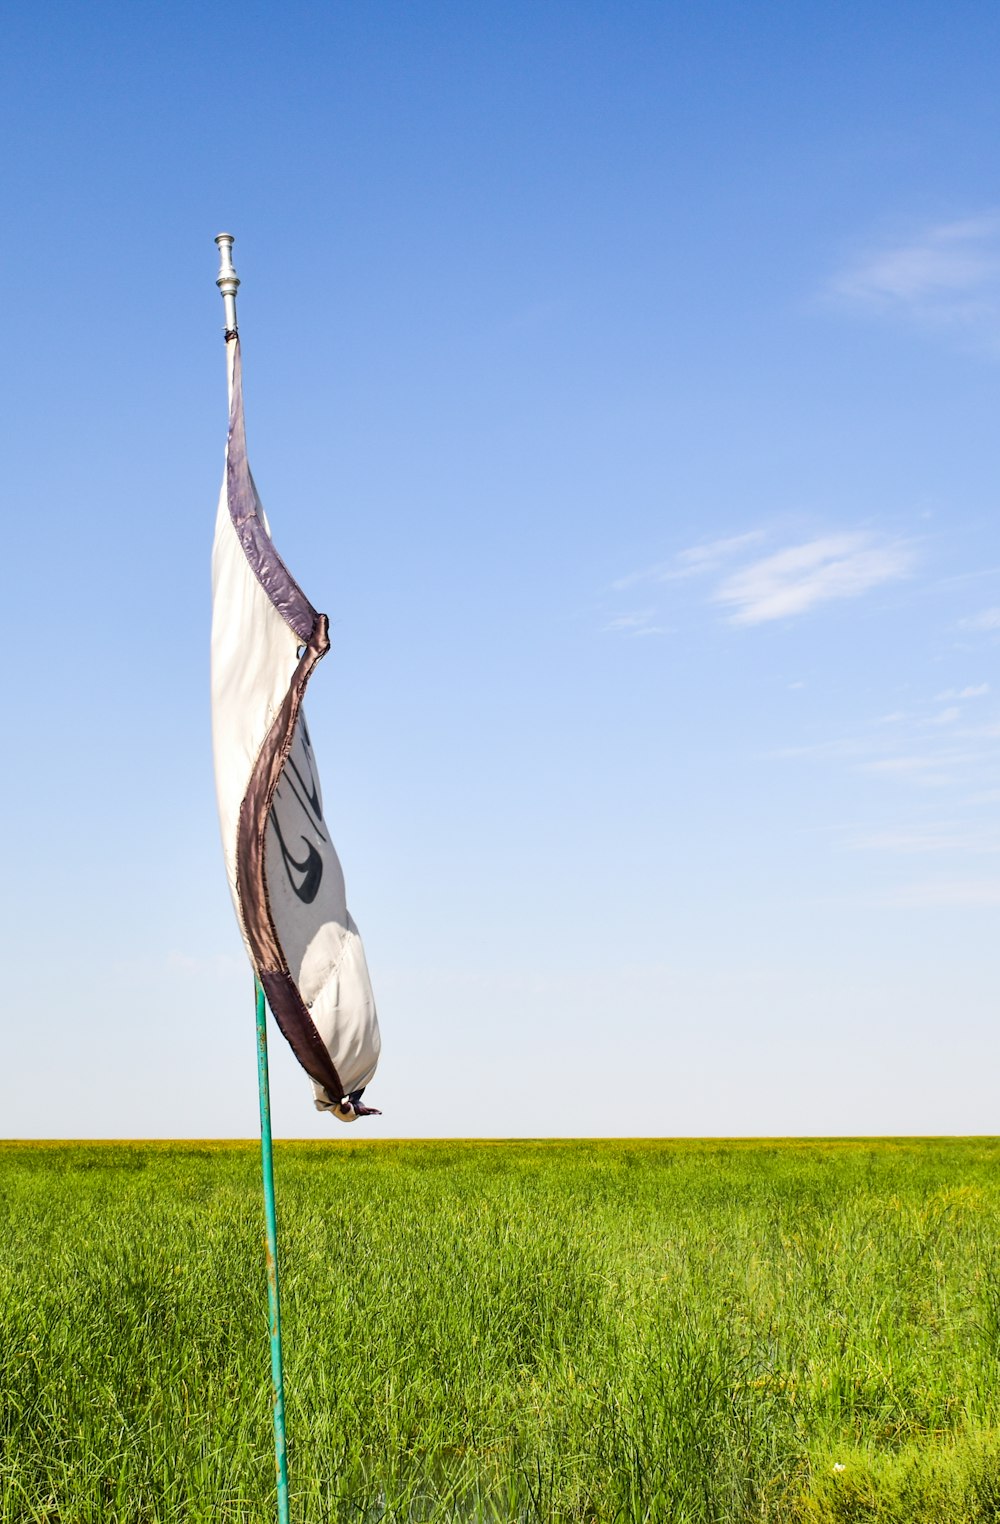 black and white flag on green grass field under blue sky during daytime